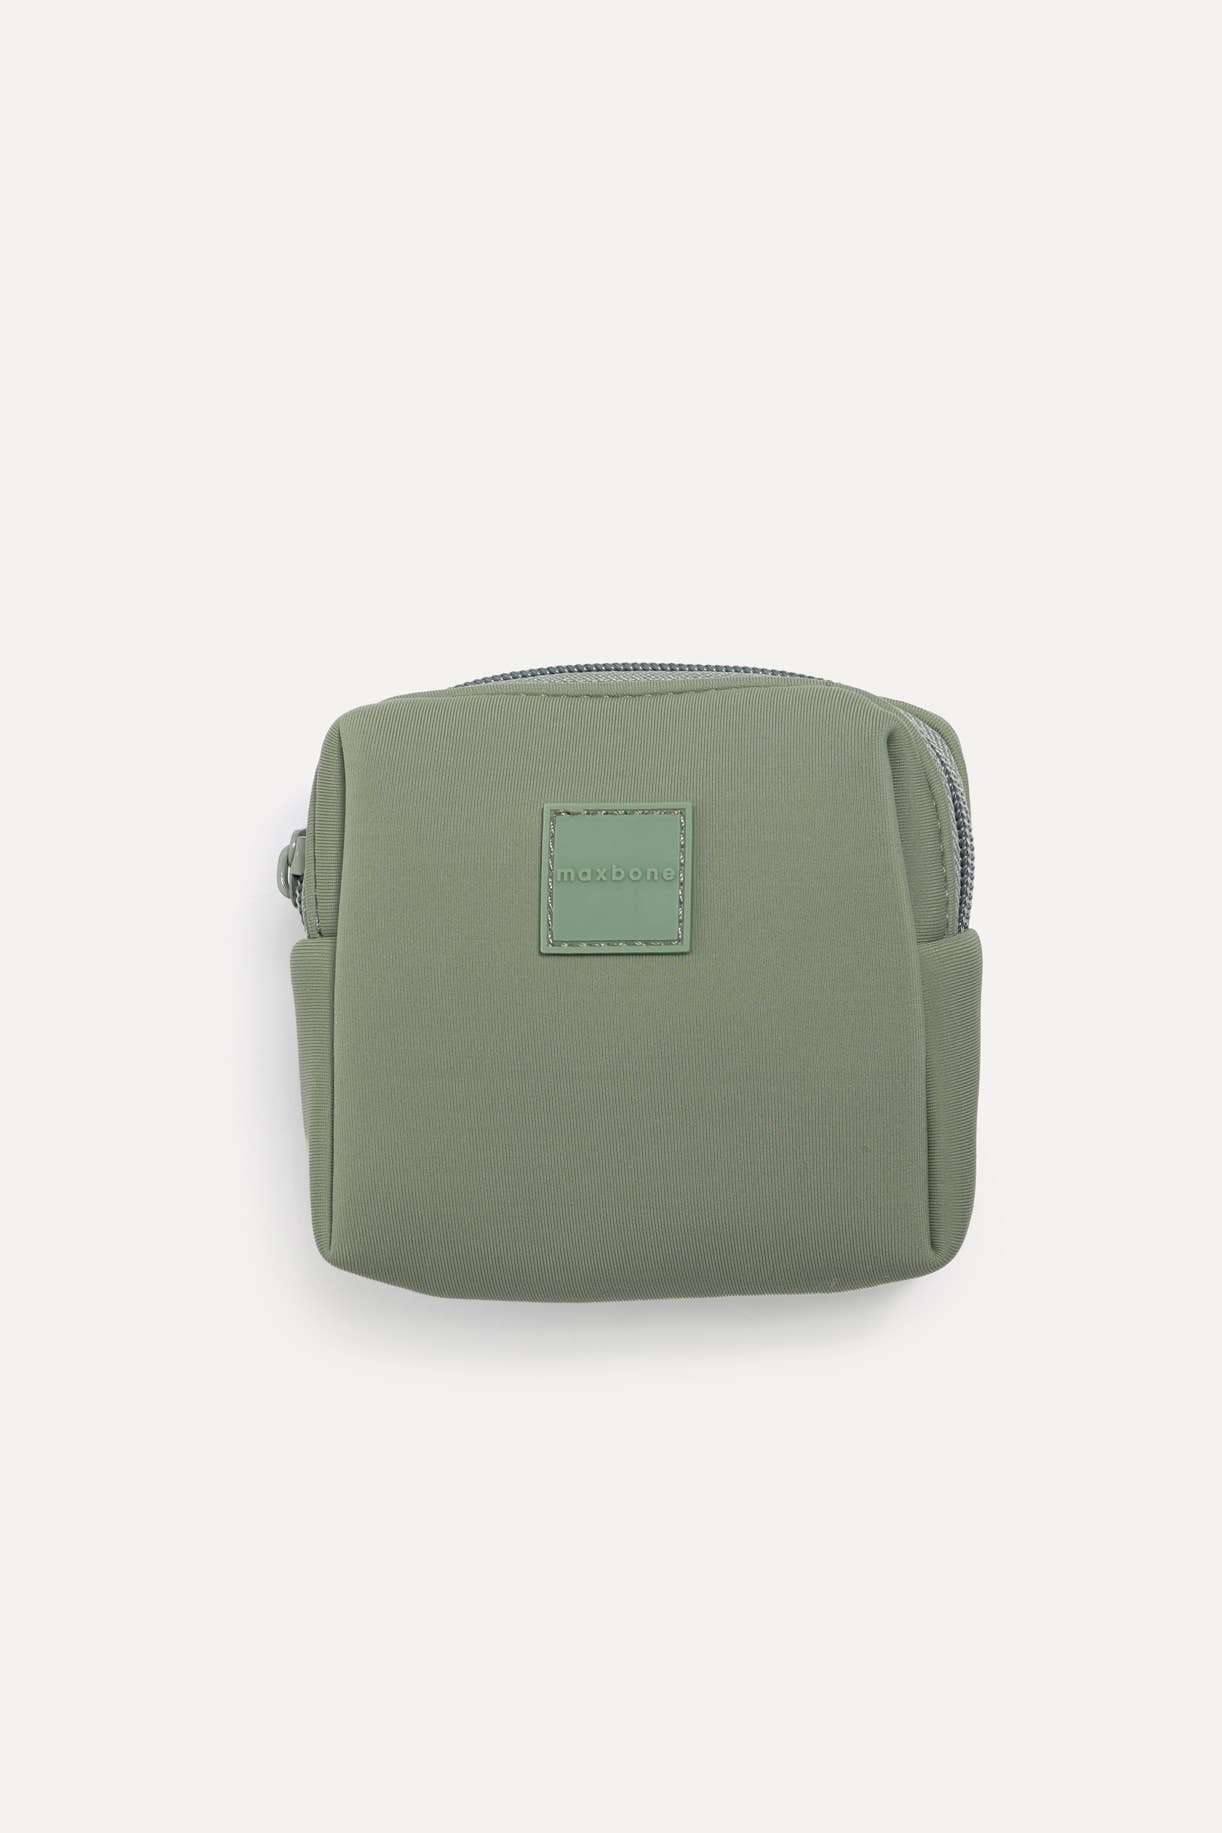 Go with Ease Pouch: Large / Sage